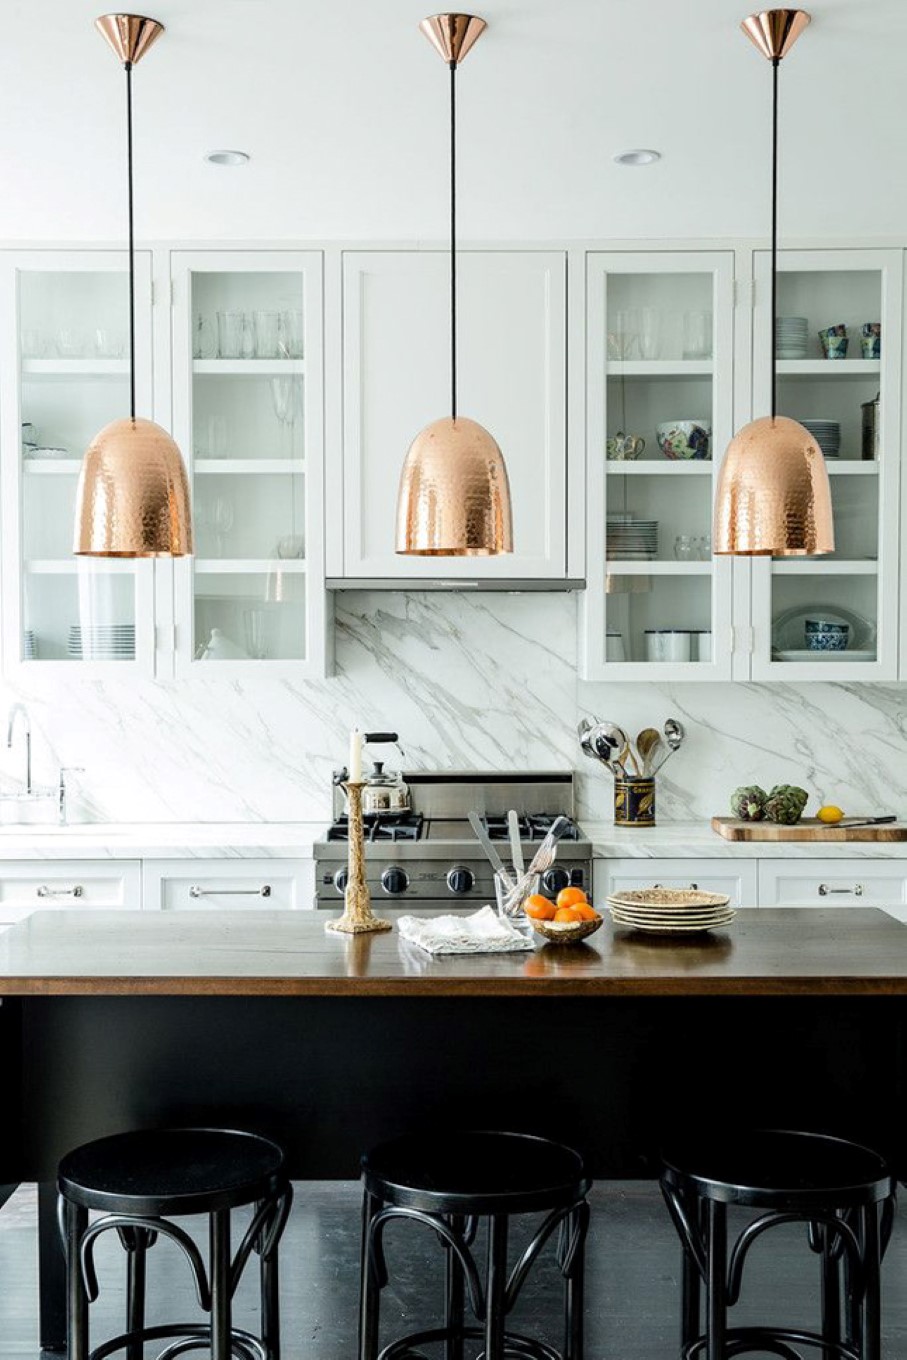 Filled Marble Feat Kitchen Filled Marble Backsplash Idea Feat Amazing Copper Pendant Lights And Industrial Barstools Design House Designs  Pendant Lights With Beautiful Copper Shades Become The Center Of Attention In Rooms 